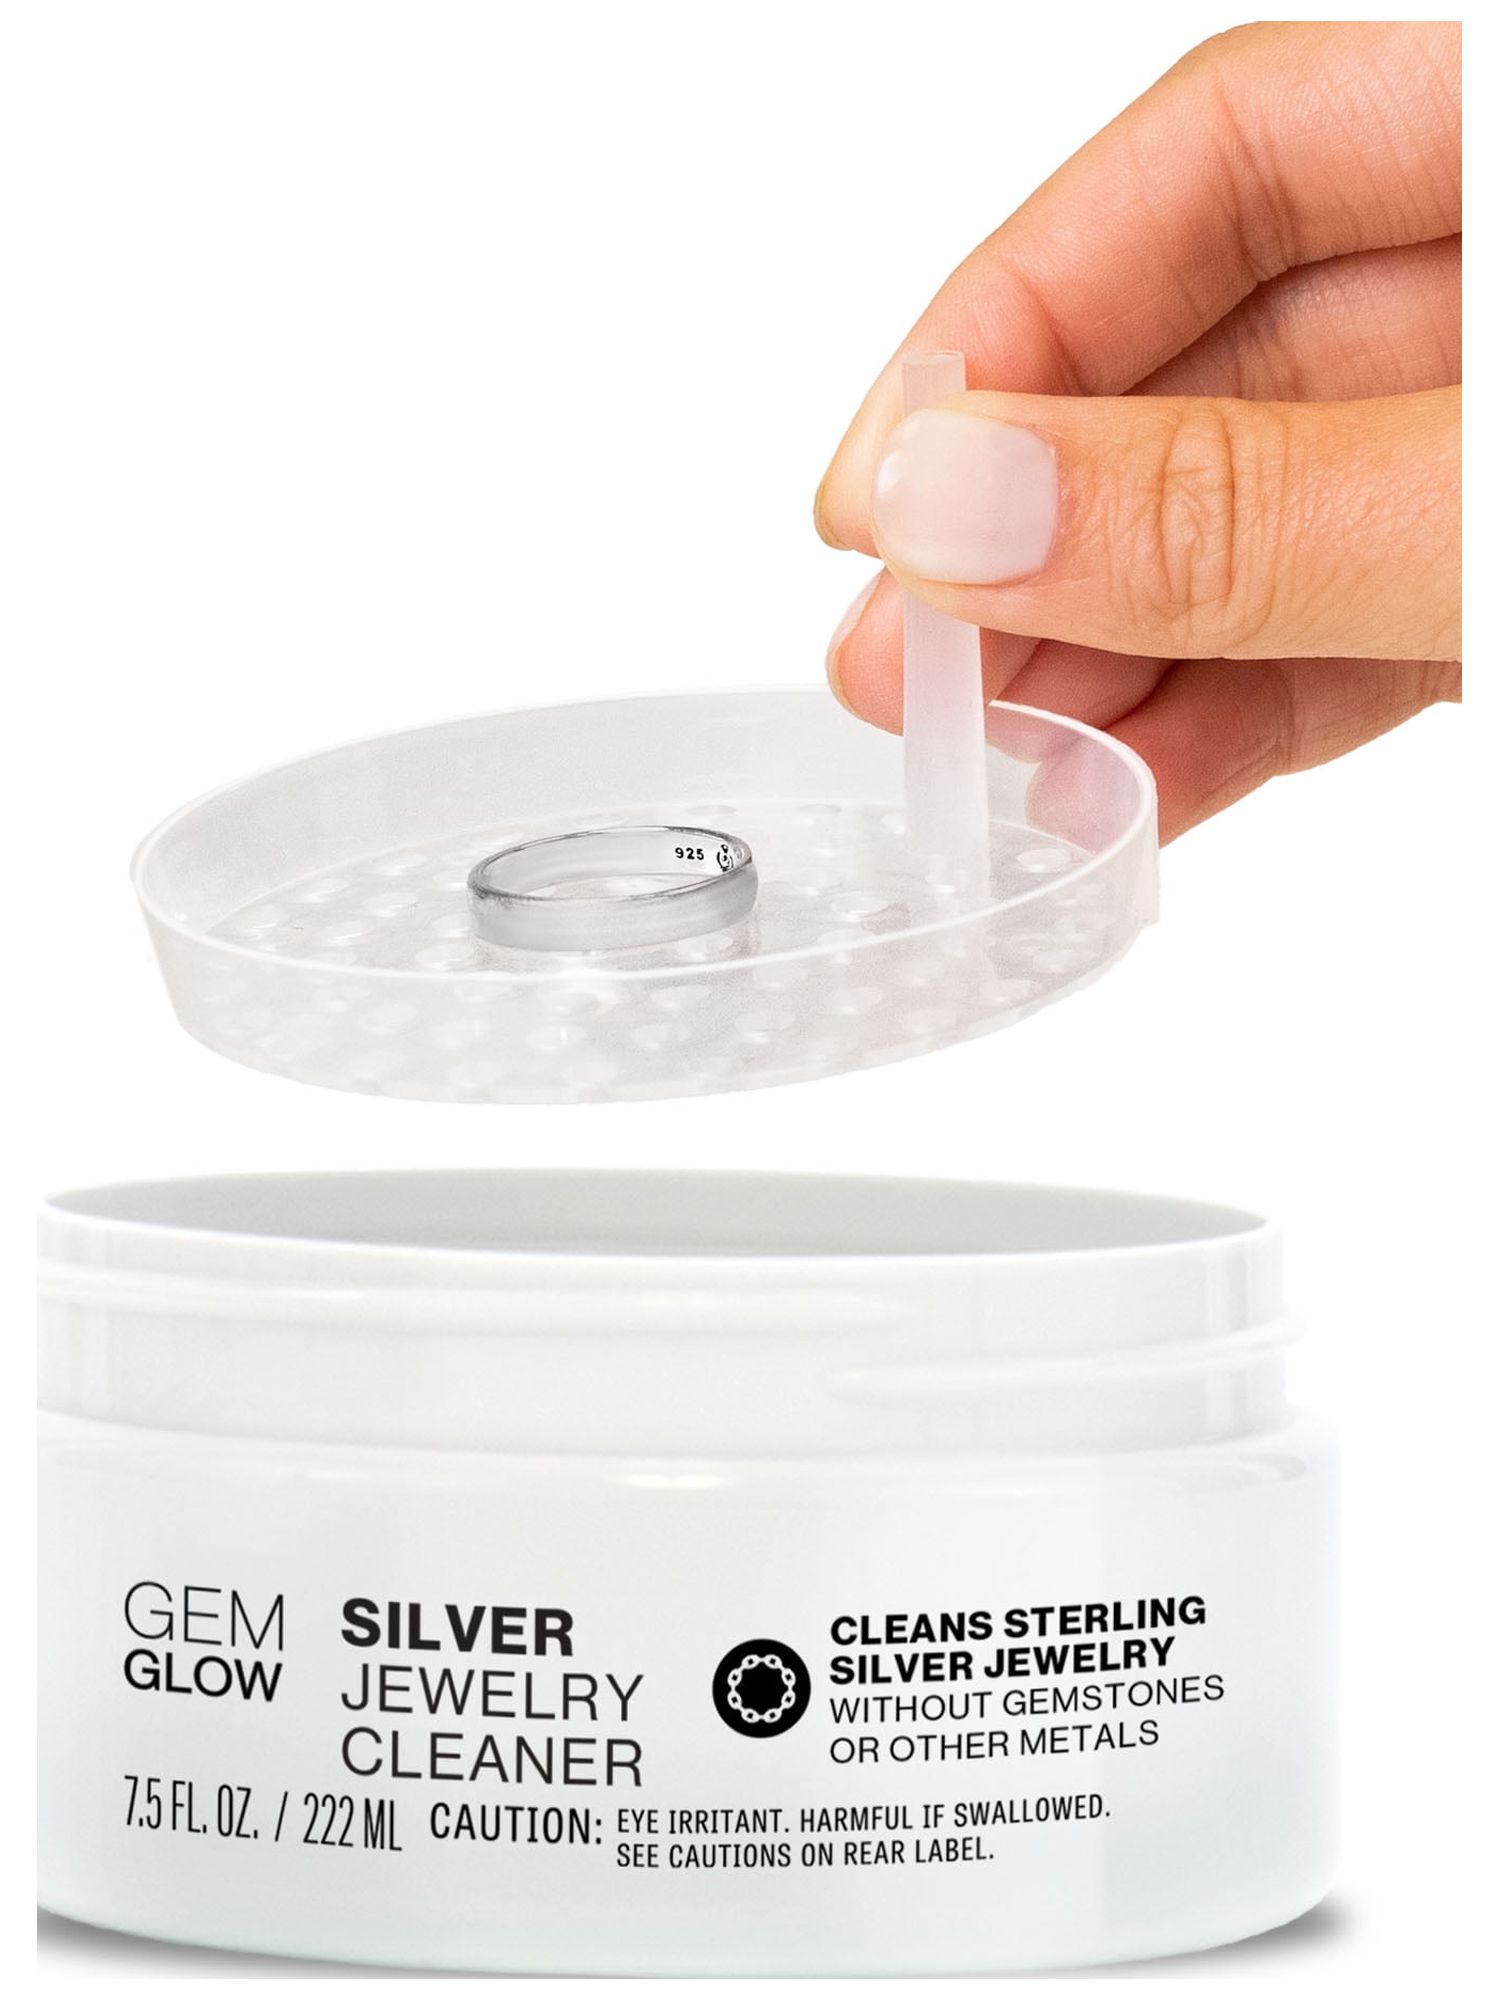 Gem Glow Sterling Silver Jewelry Cleaner, Removes Light Tarnish